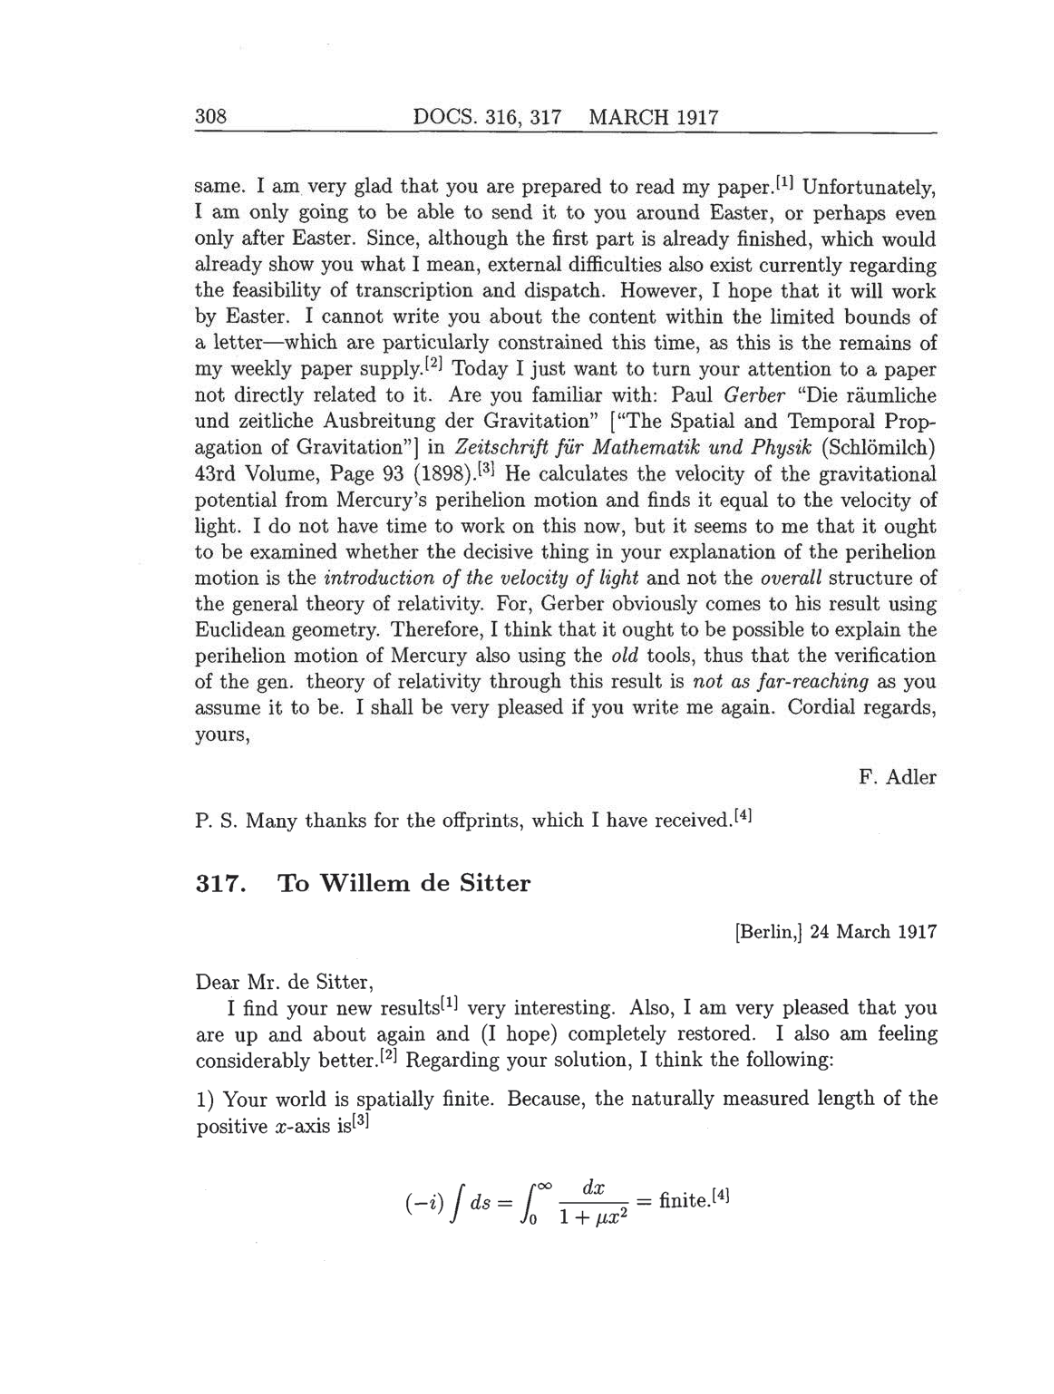 Volume 8: The Berlin Years: Correspondence, 1914-1918 (English translation supplement) page 308